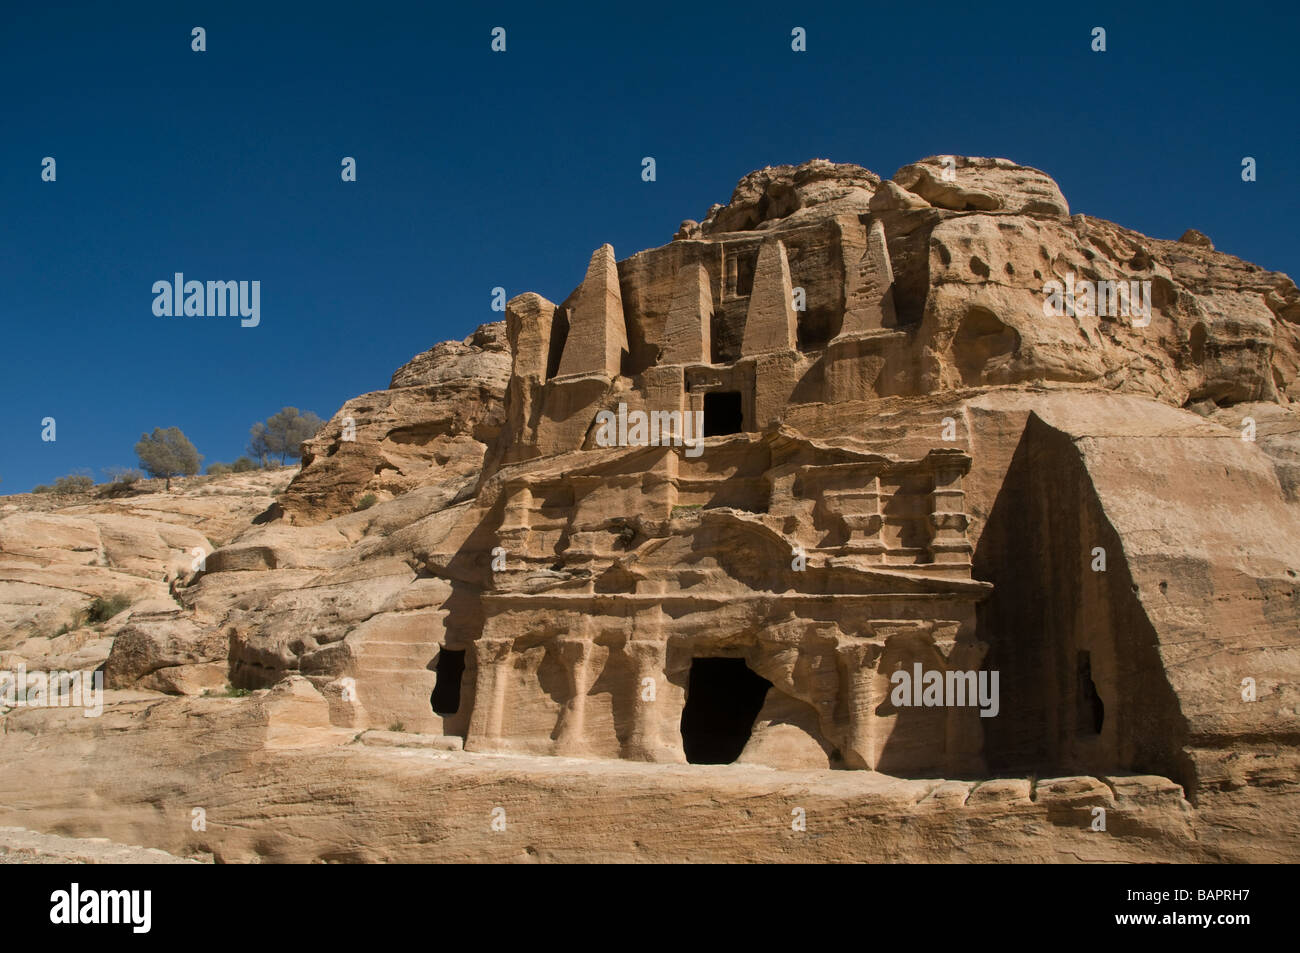 View of the rock cut monument 'Obelisk Tomb' carved into pink sandstone cliff in the ancient Nabatean city of Petra Jordan Stock Photo